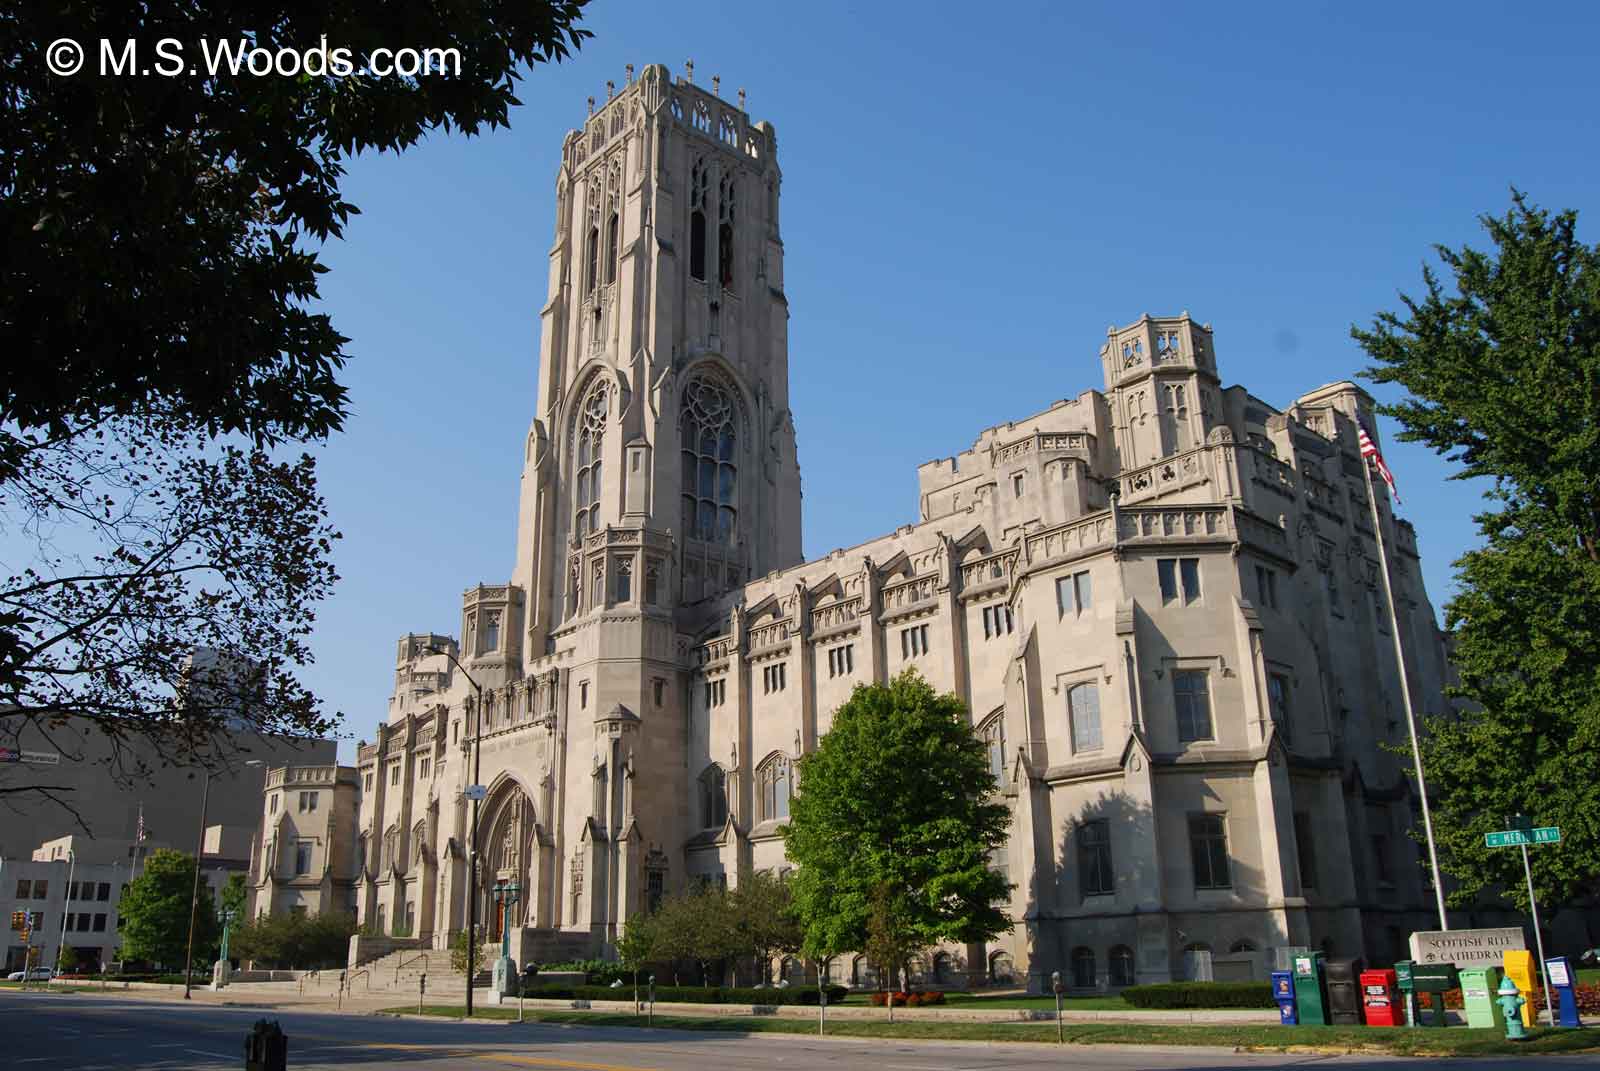 Scottish Rite Cathedral in downtown Indianapolis, Indiana